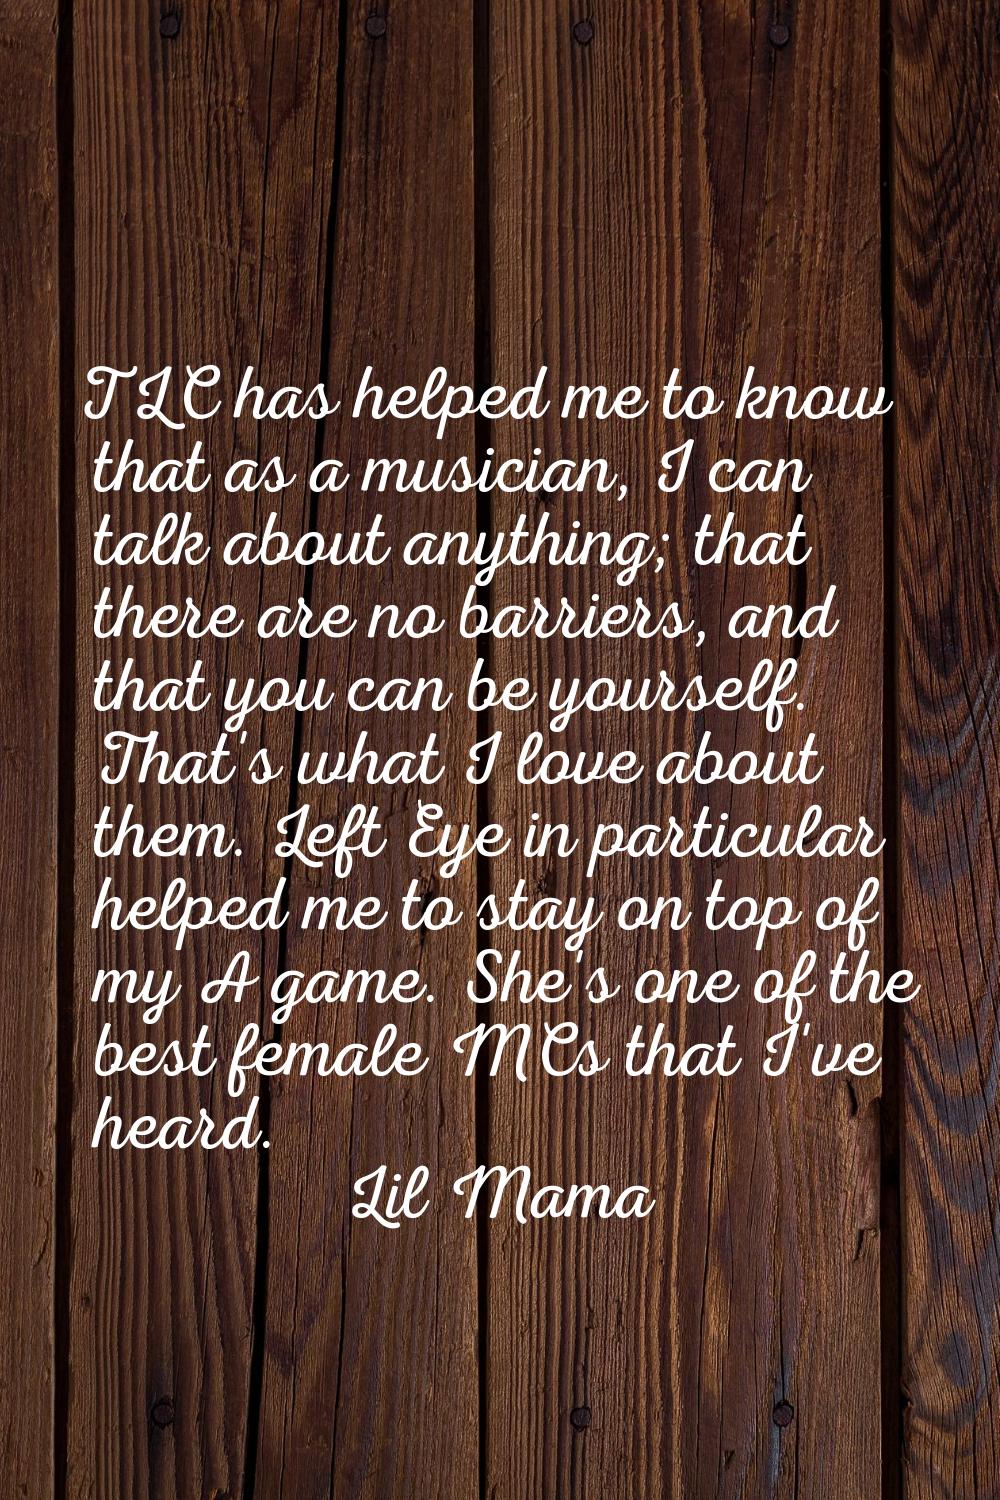 TLC has helped me to know that as a musician, I can talk about anything; that there are no barriers